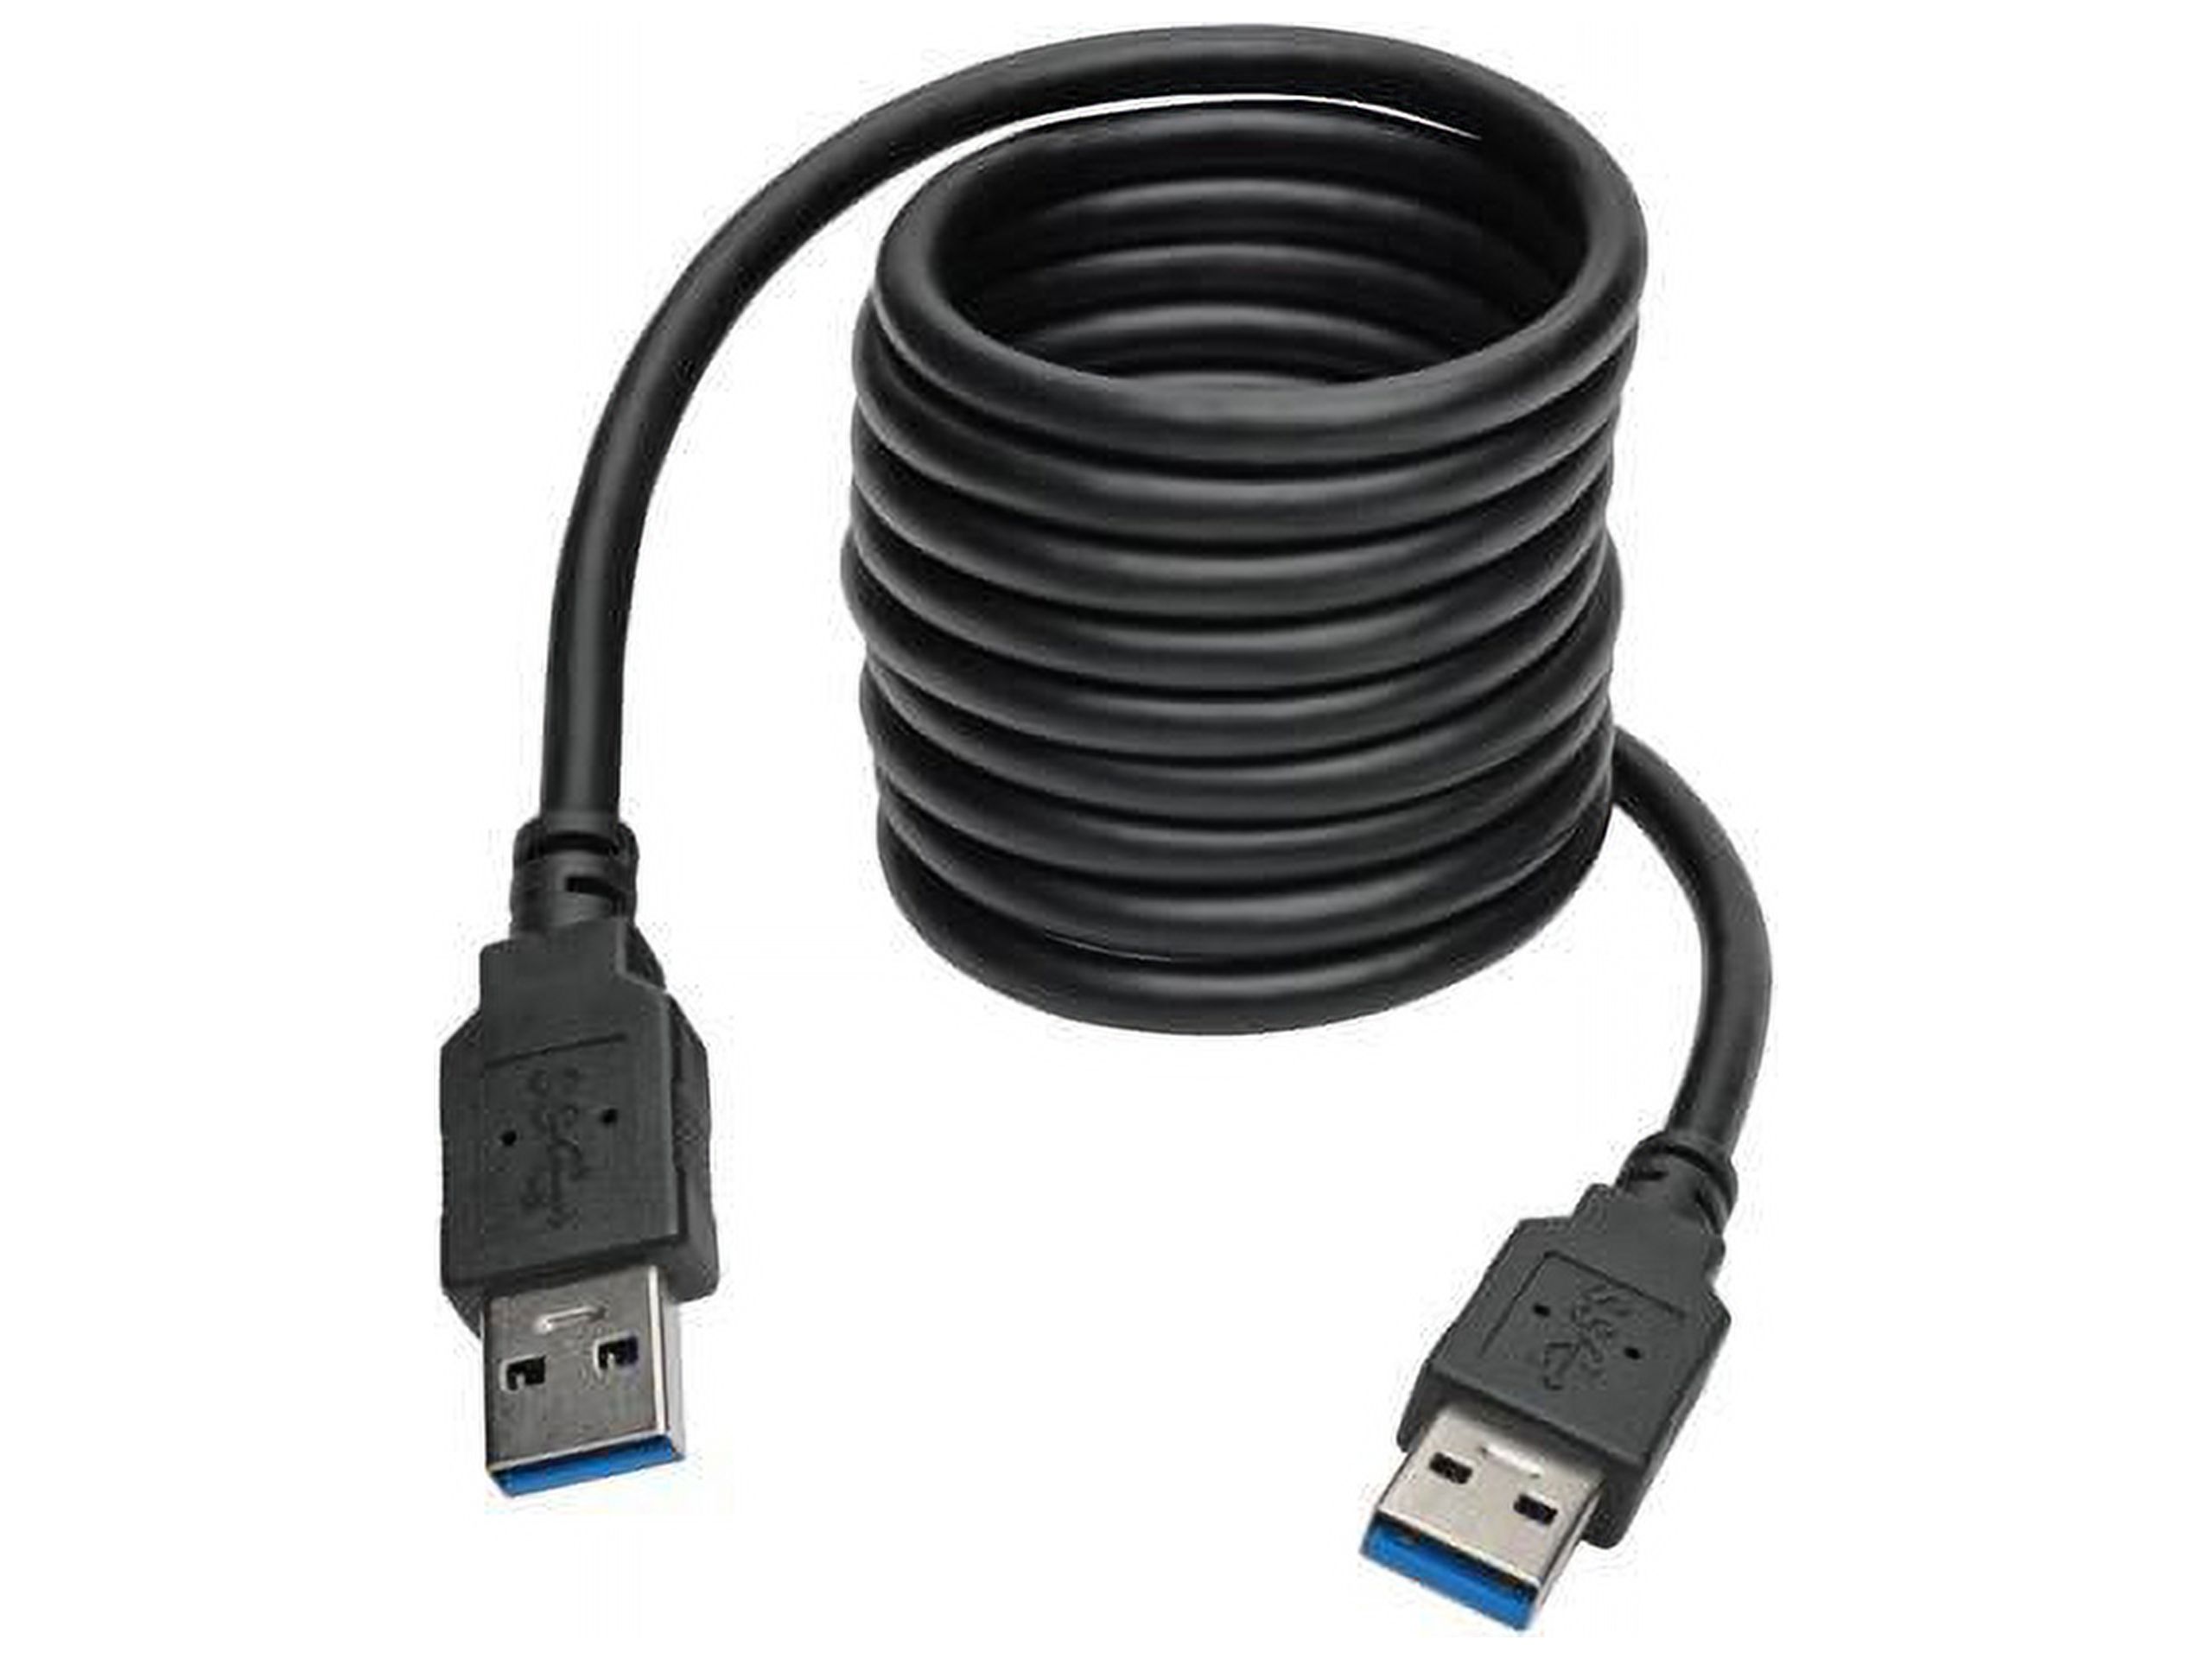 Tripp Lite 6 ft. USB 3.0 SuperSpeed A/A Cable (M/M), 28/24 AWG, 5 Gbps, Black, 6' (U320-006-BK) - image 3 of 3